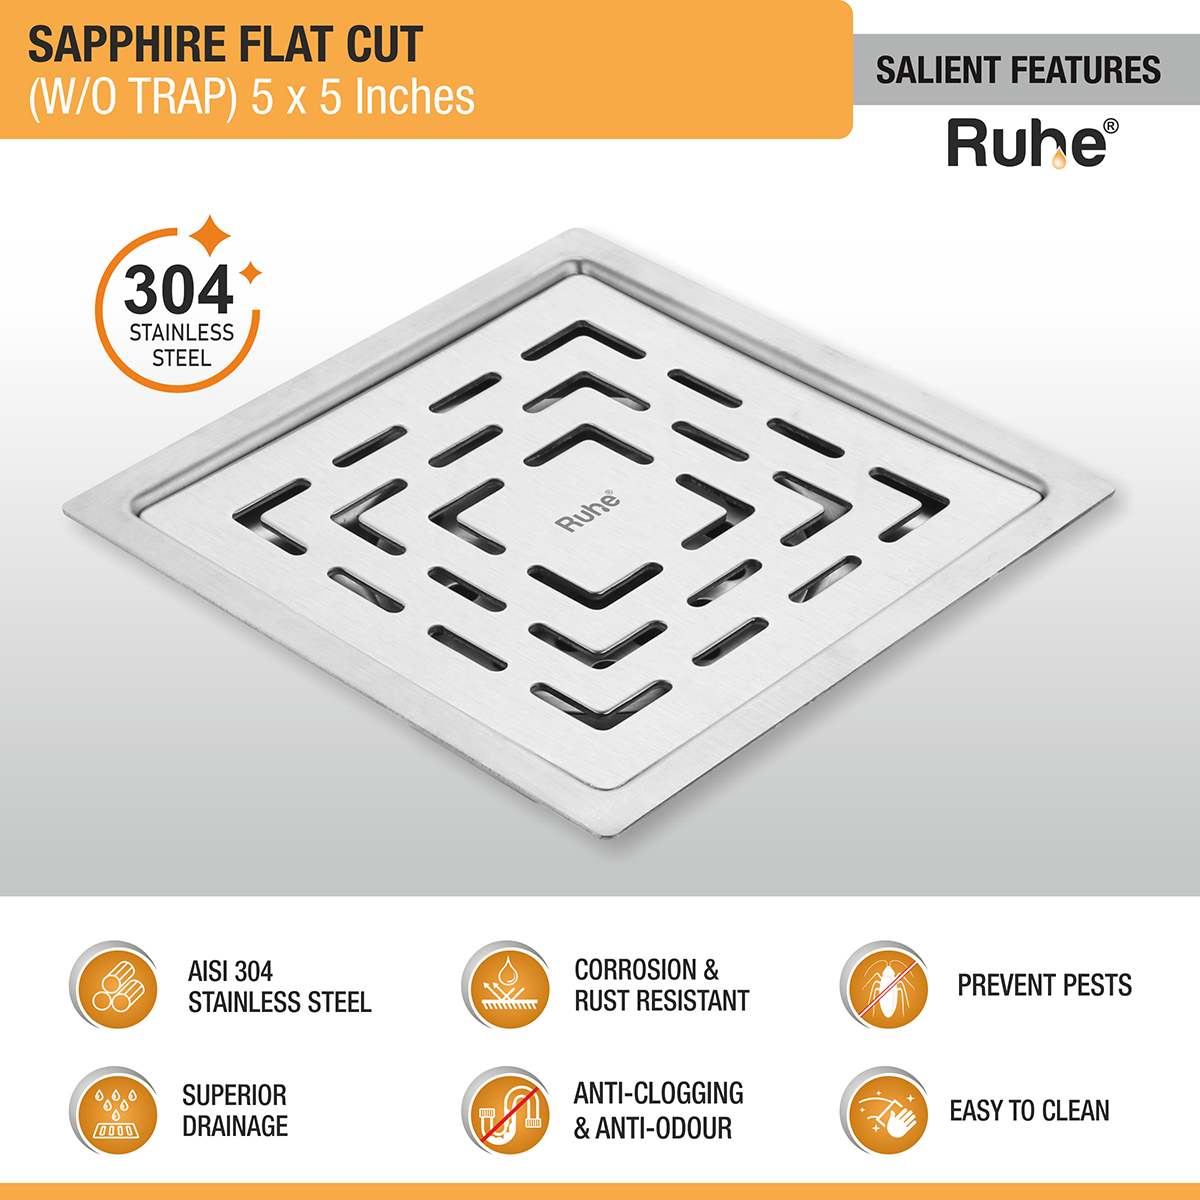 Sapphire Square Flat Cut 304-Grade Floor Drain (5 x 5 Inches) featutres and benefits